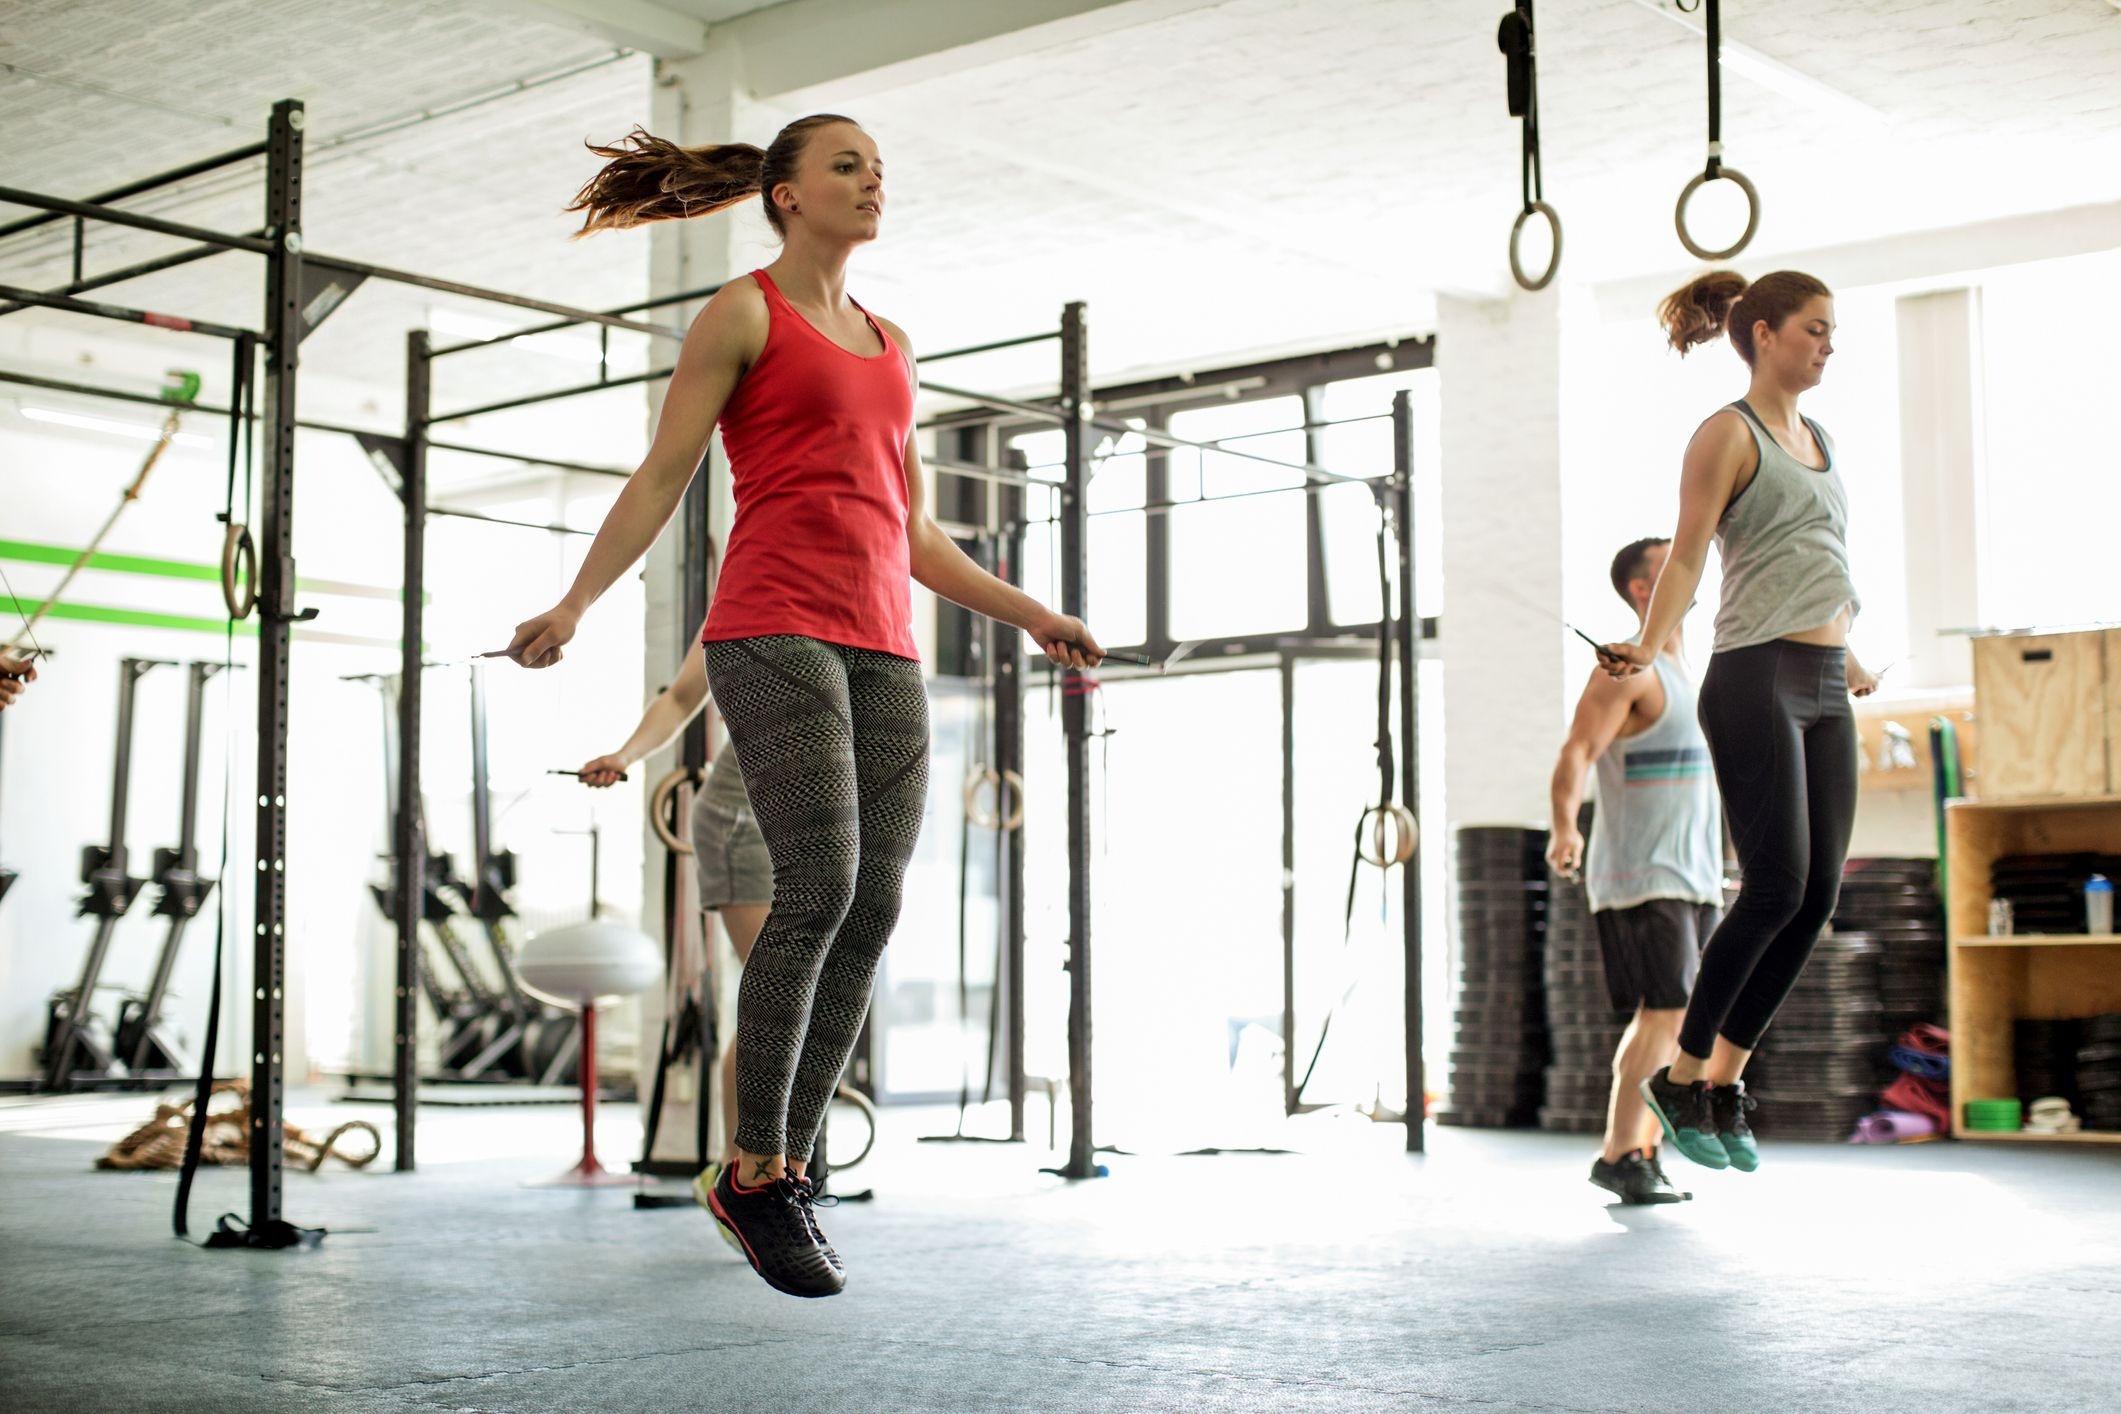 Rope Jumping: Fitness equipment, Group fitness classes, Jumping. 2130x1420 HD Wallpaper.